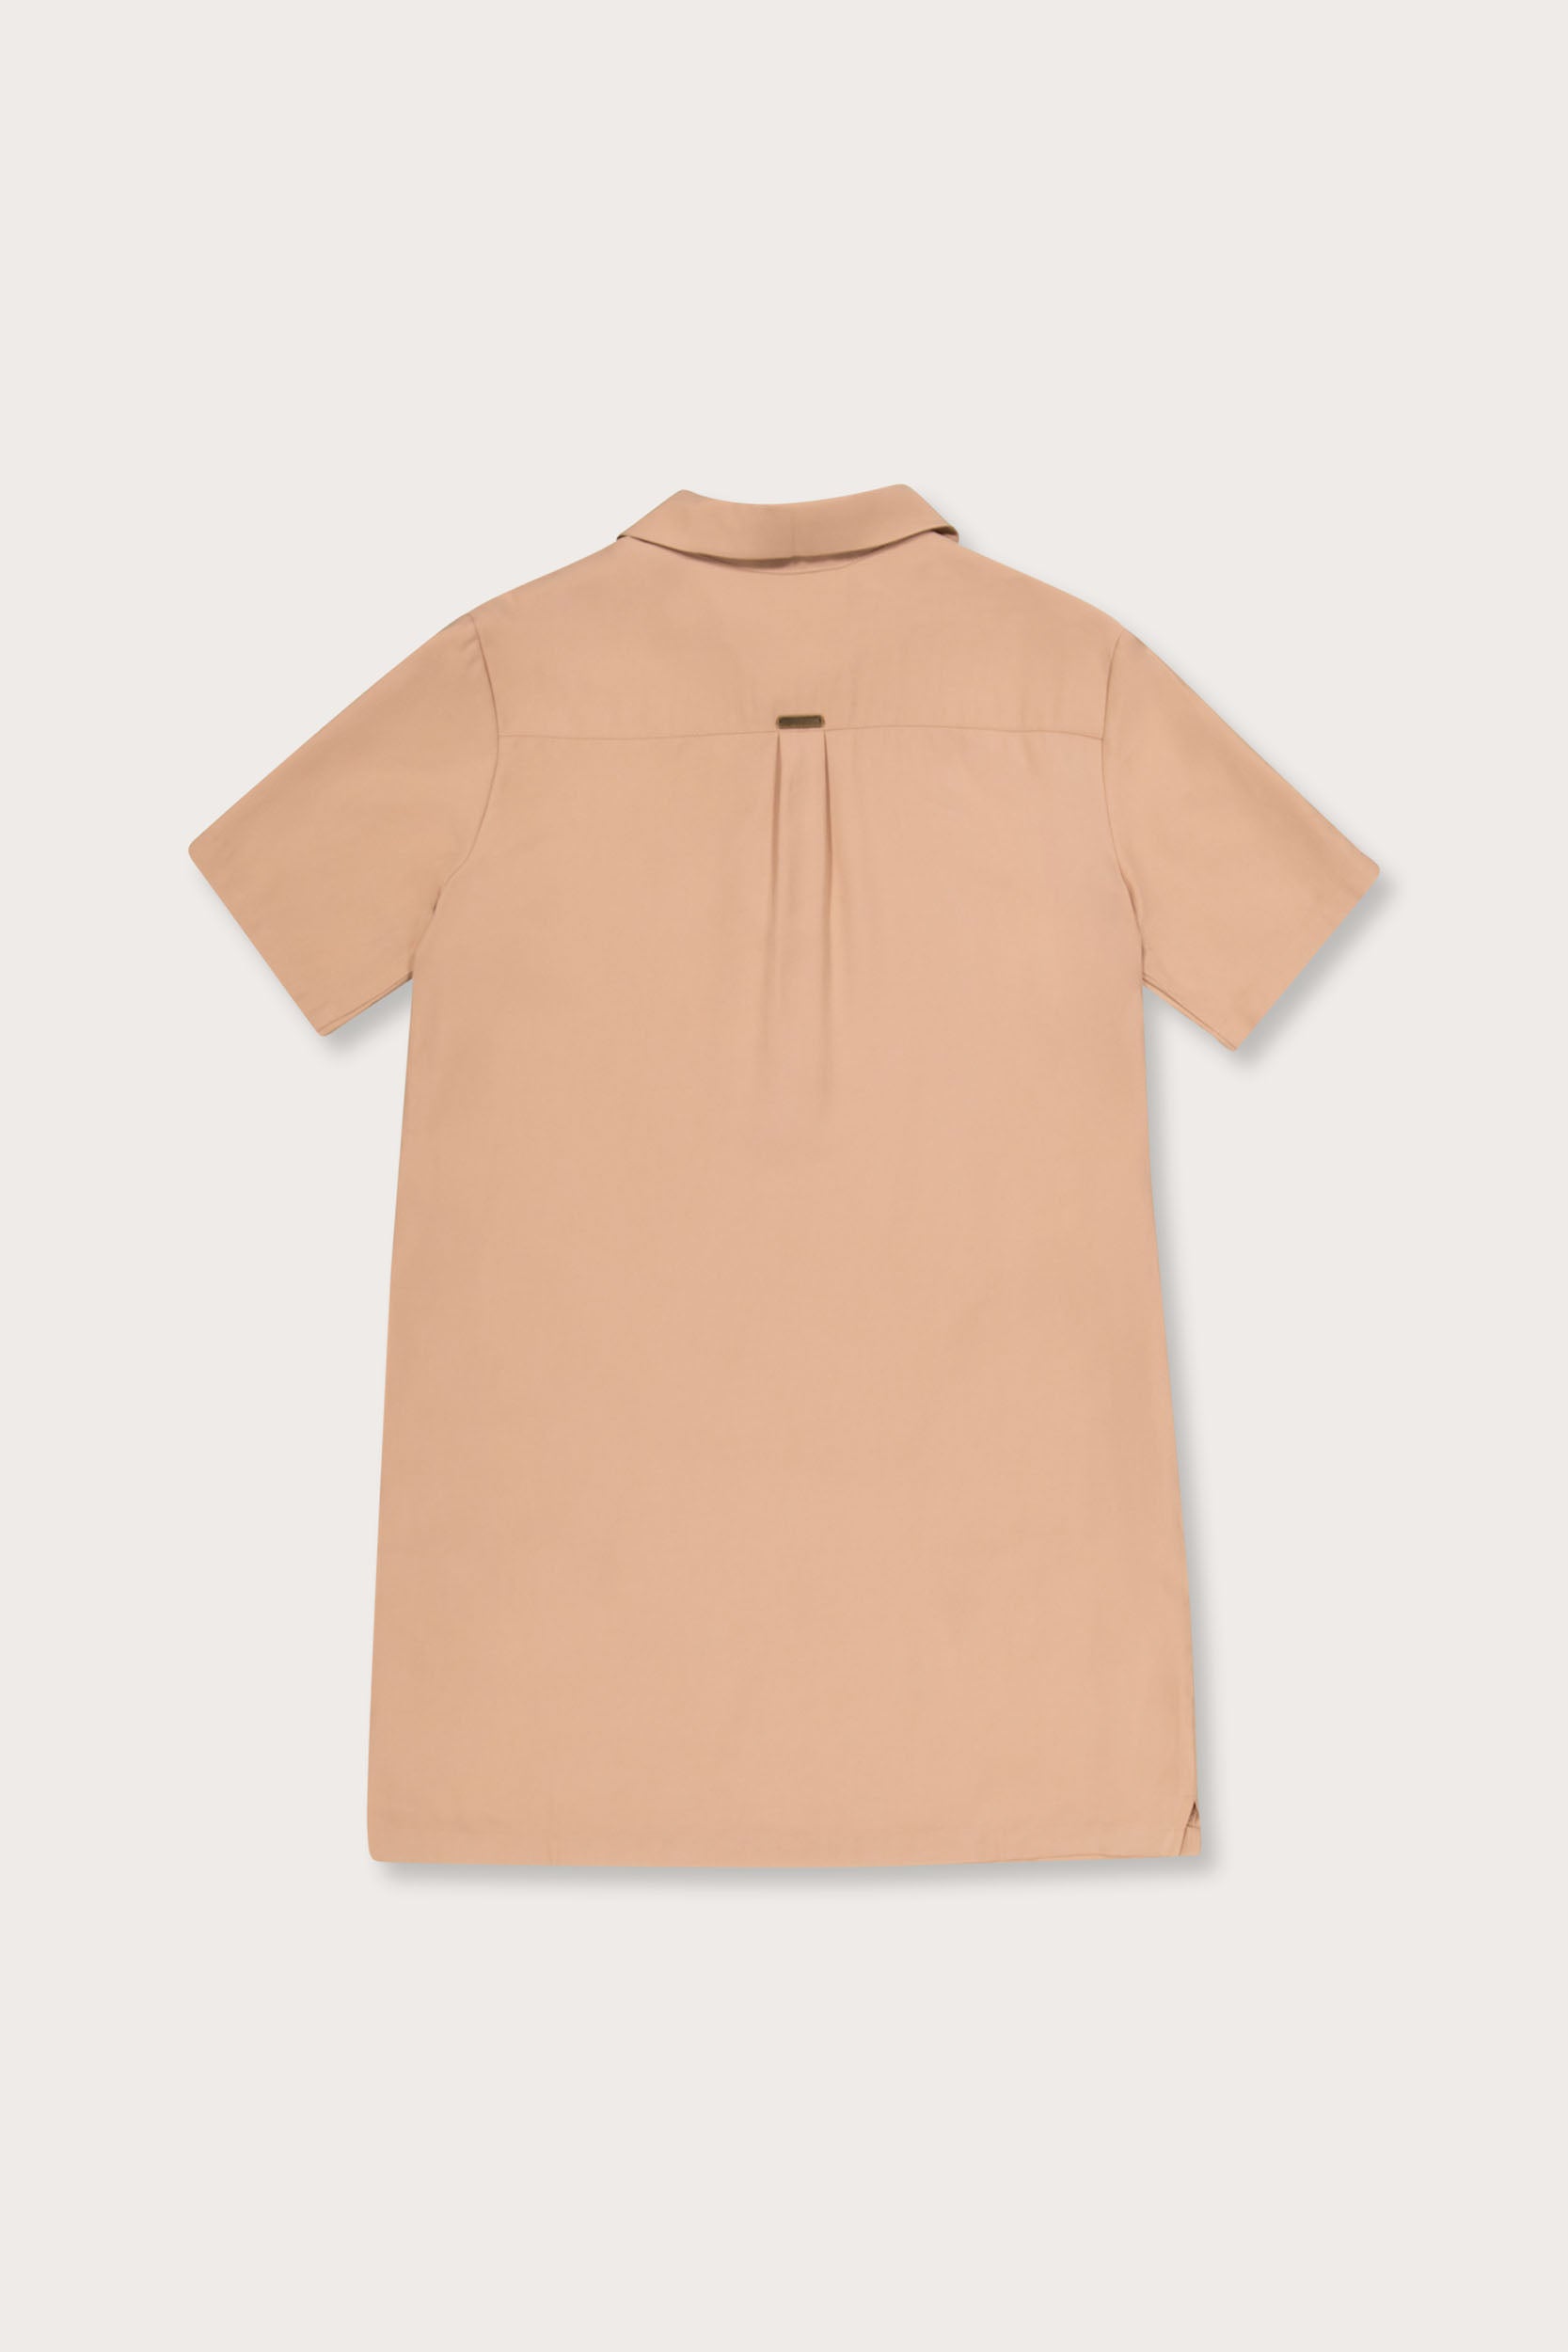 FOM Ladies Button Up Dress Short Sleeve - Dusty Pink